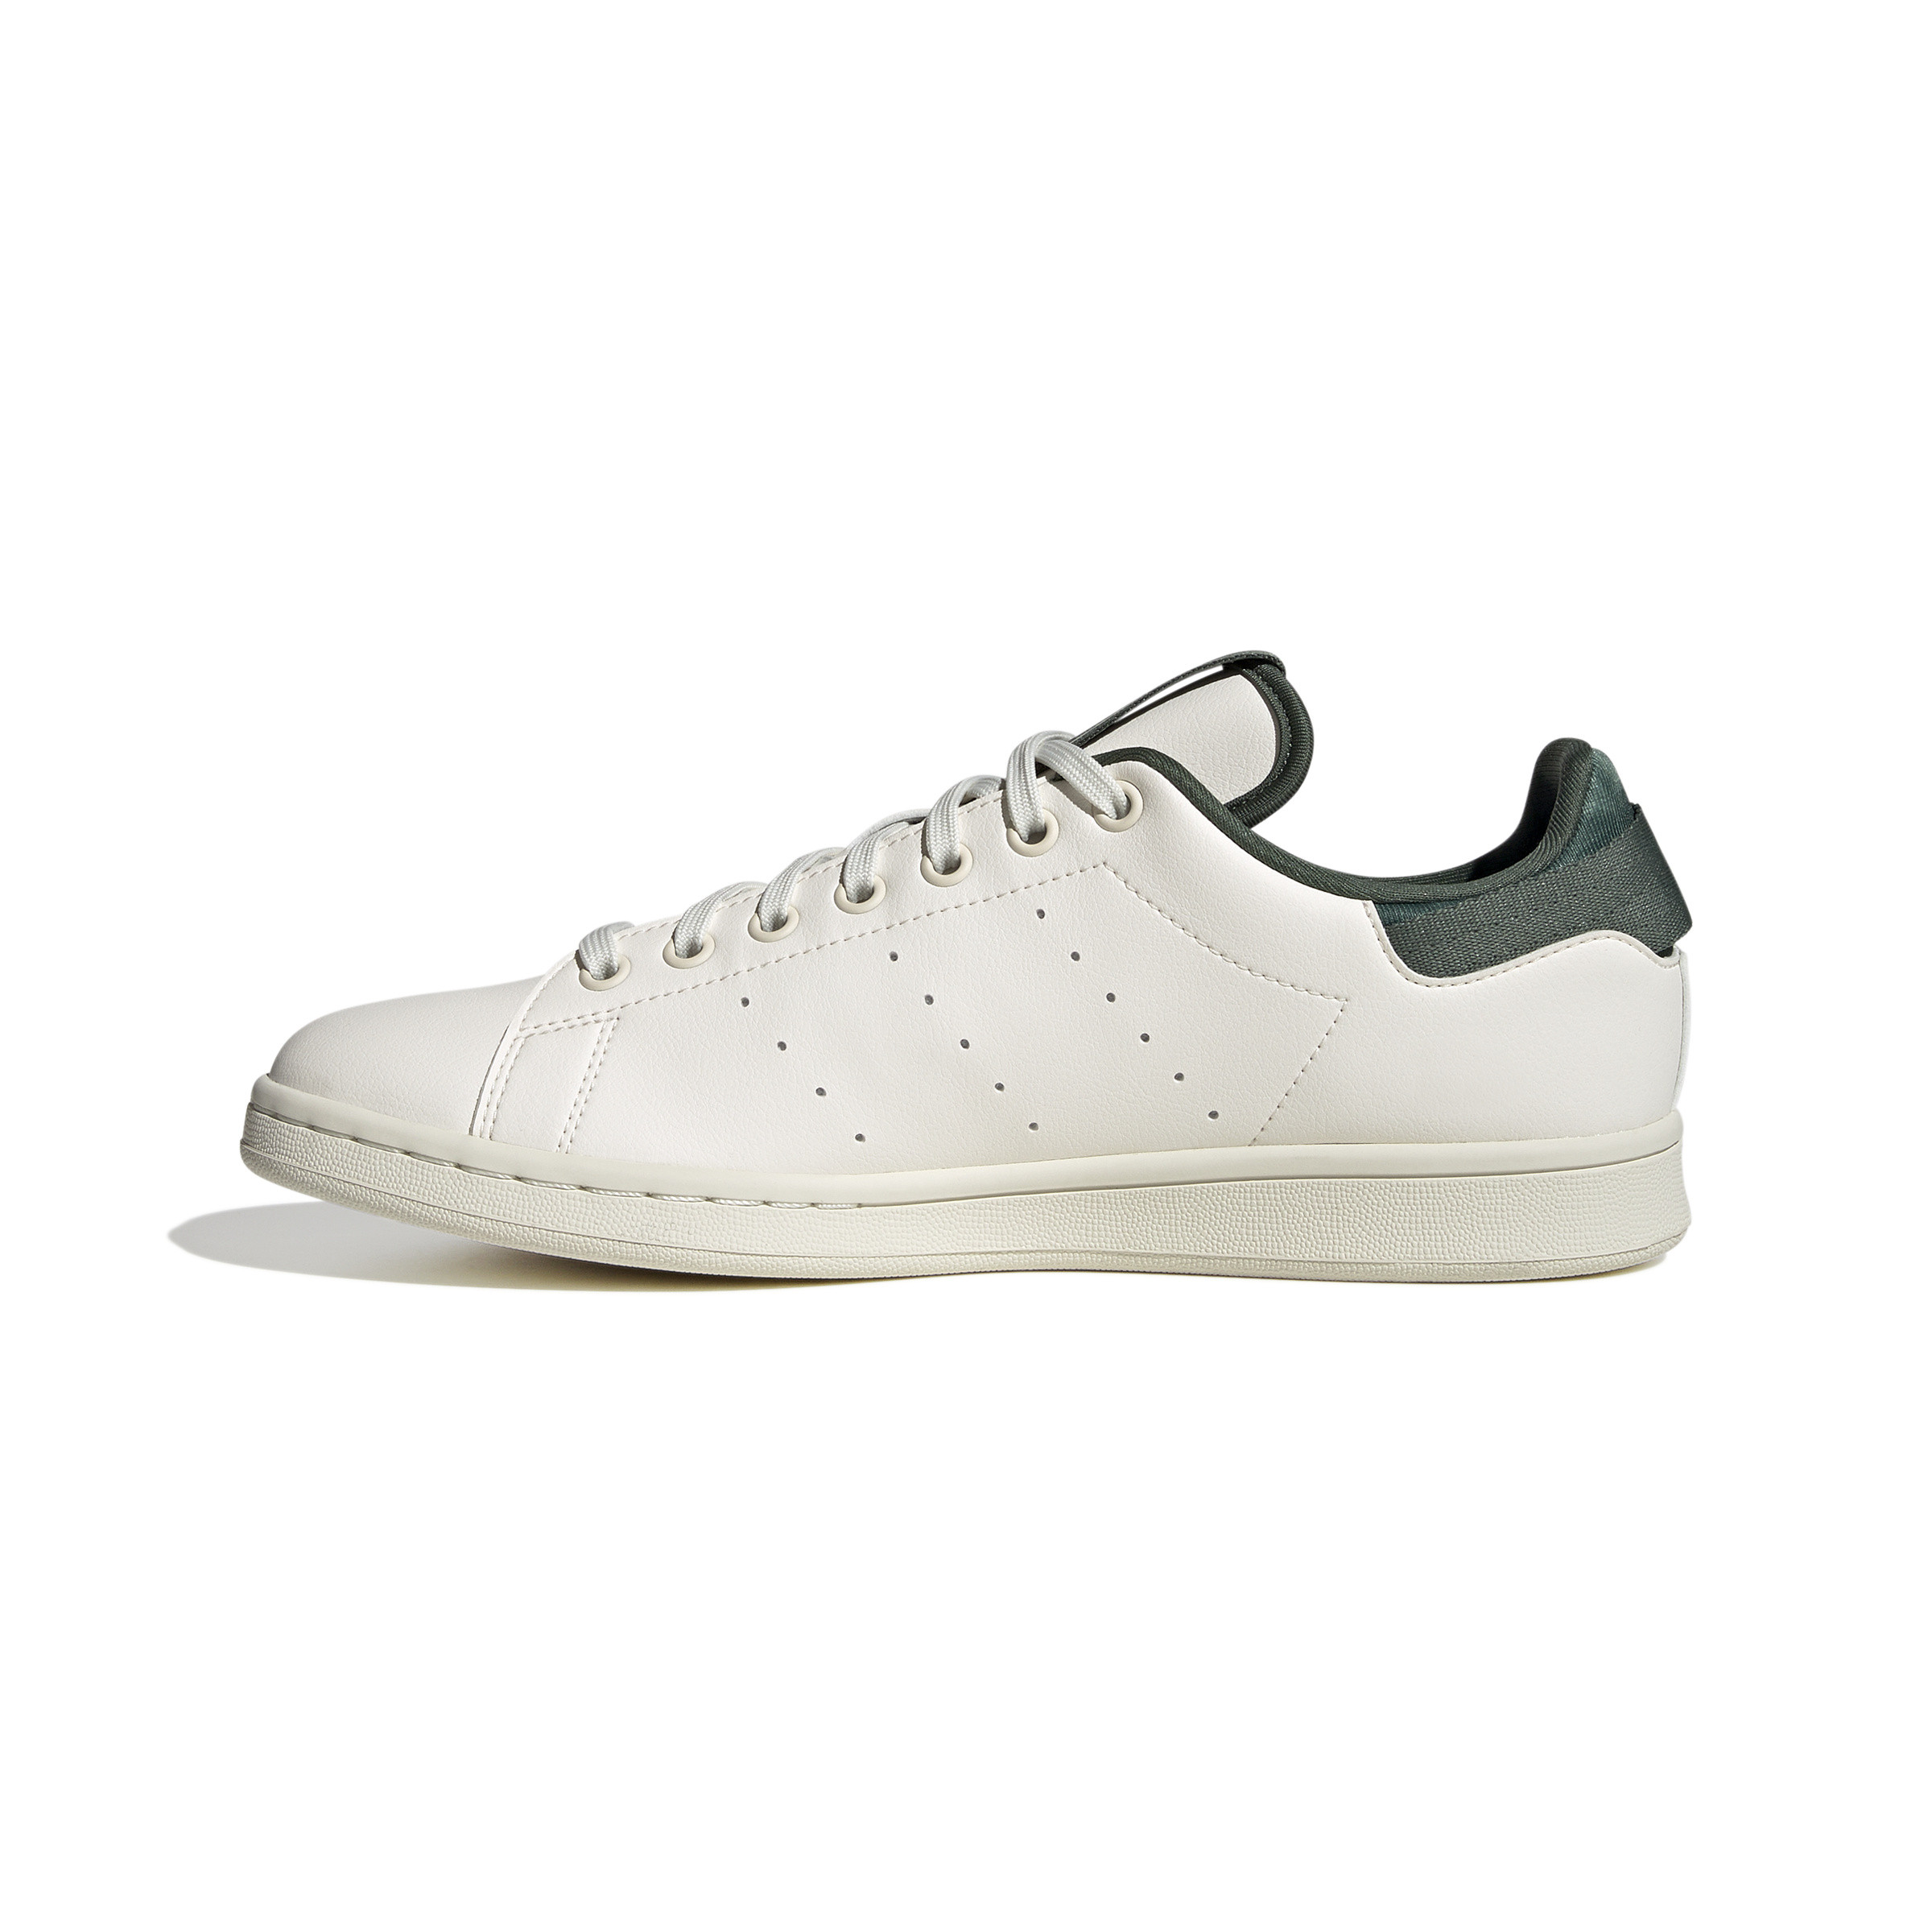 Adidas - Stan Smith Parley Shoes - Coin.it | Coin Ecom